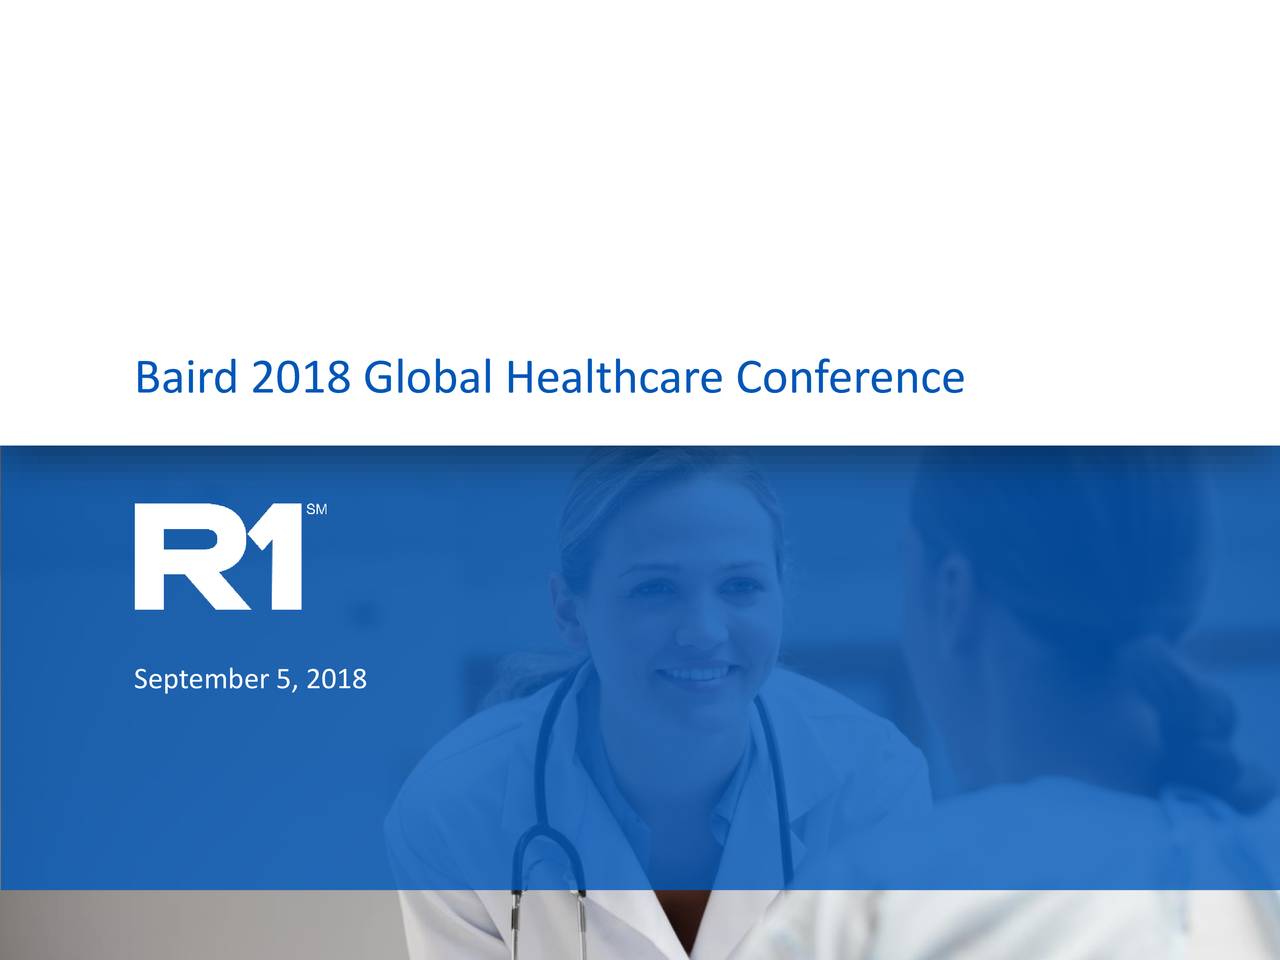 R1 RCM (RCM) Presents At Baird's Global Healthcare Conference